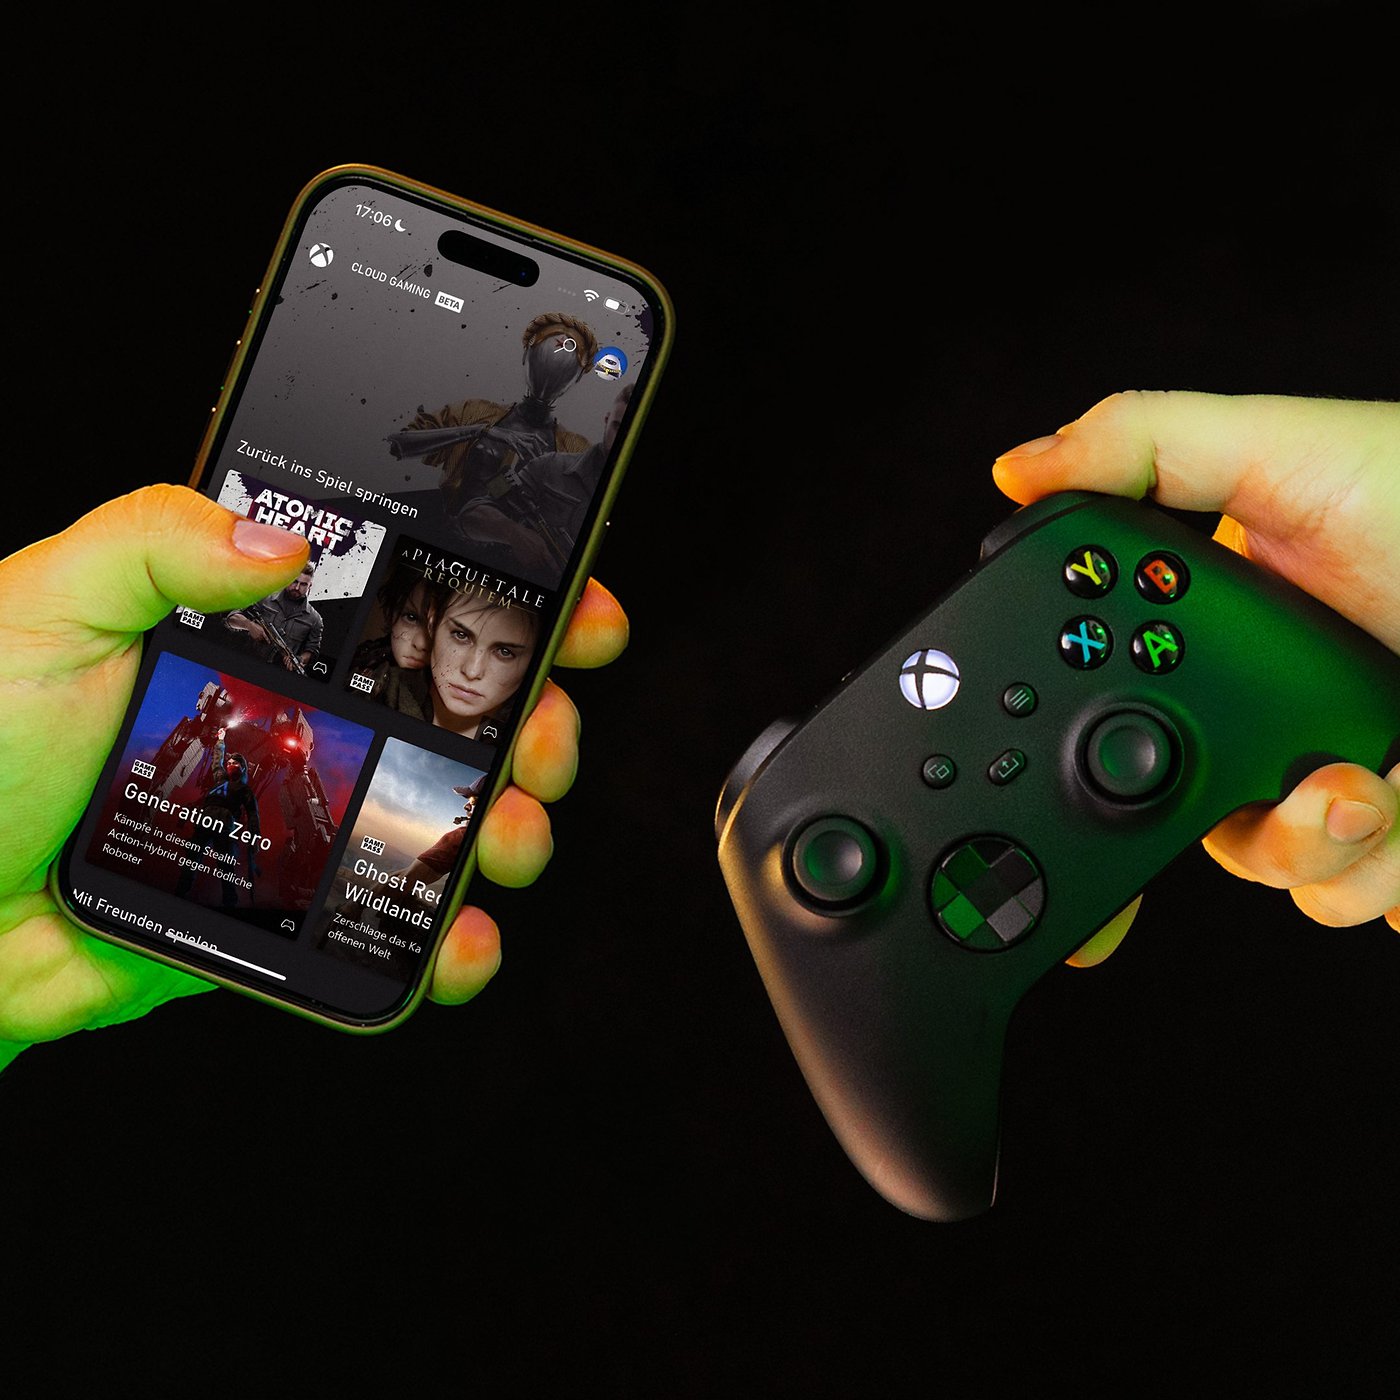 How to Play Xbox Game Pass On iPhone and iPad - TurboFuture